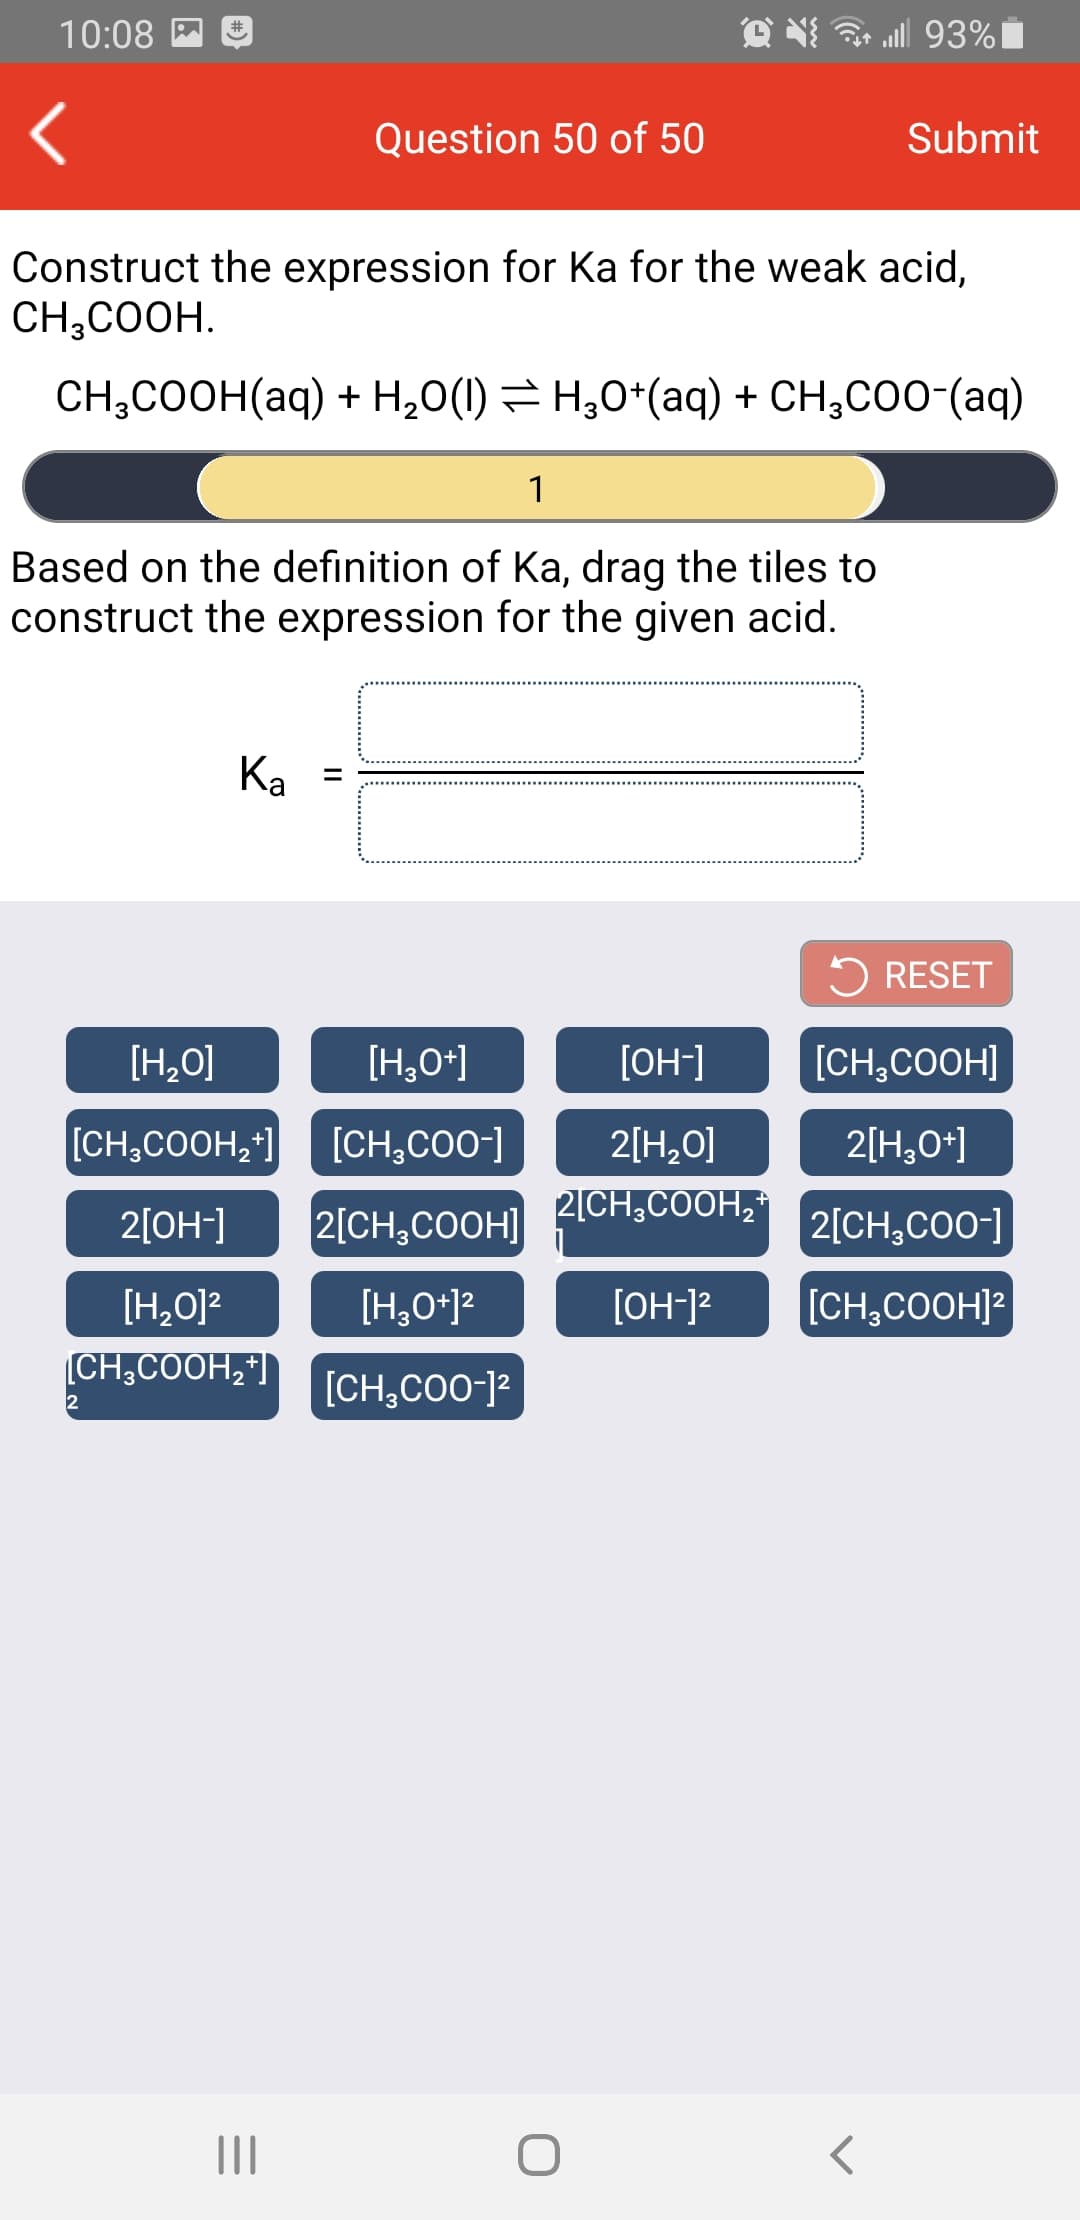 ll 93%|
10:08 M
#
Question 50 of 50
Submit
Construct the expression for Ka for the weak acid,
CH,COOH.
CH;COOH(aq) + H,0(1) = H;0*(aq) + CH,CO0-(aq)
1
Based on the definition of Ka, drag the tiles to
construct the expression for the given acid.
Ka
%3D
5 RESET
[H,O]
[H,O*]
[OH-]
[CH,COOH]
[CH,COOH,*]
[CH,CO0-]
2[H,0]
2[H,0*]
2CH,COOH,
2[OH-]
2[CH,COOH]
2[CH,CO0-]
[H,0]?
[H,O*12
[OH-]?
[CH,COOH]?
(CH,COOH,"|
+
[CH,CO0-]²
II
